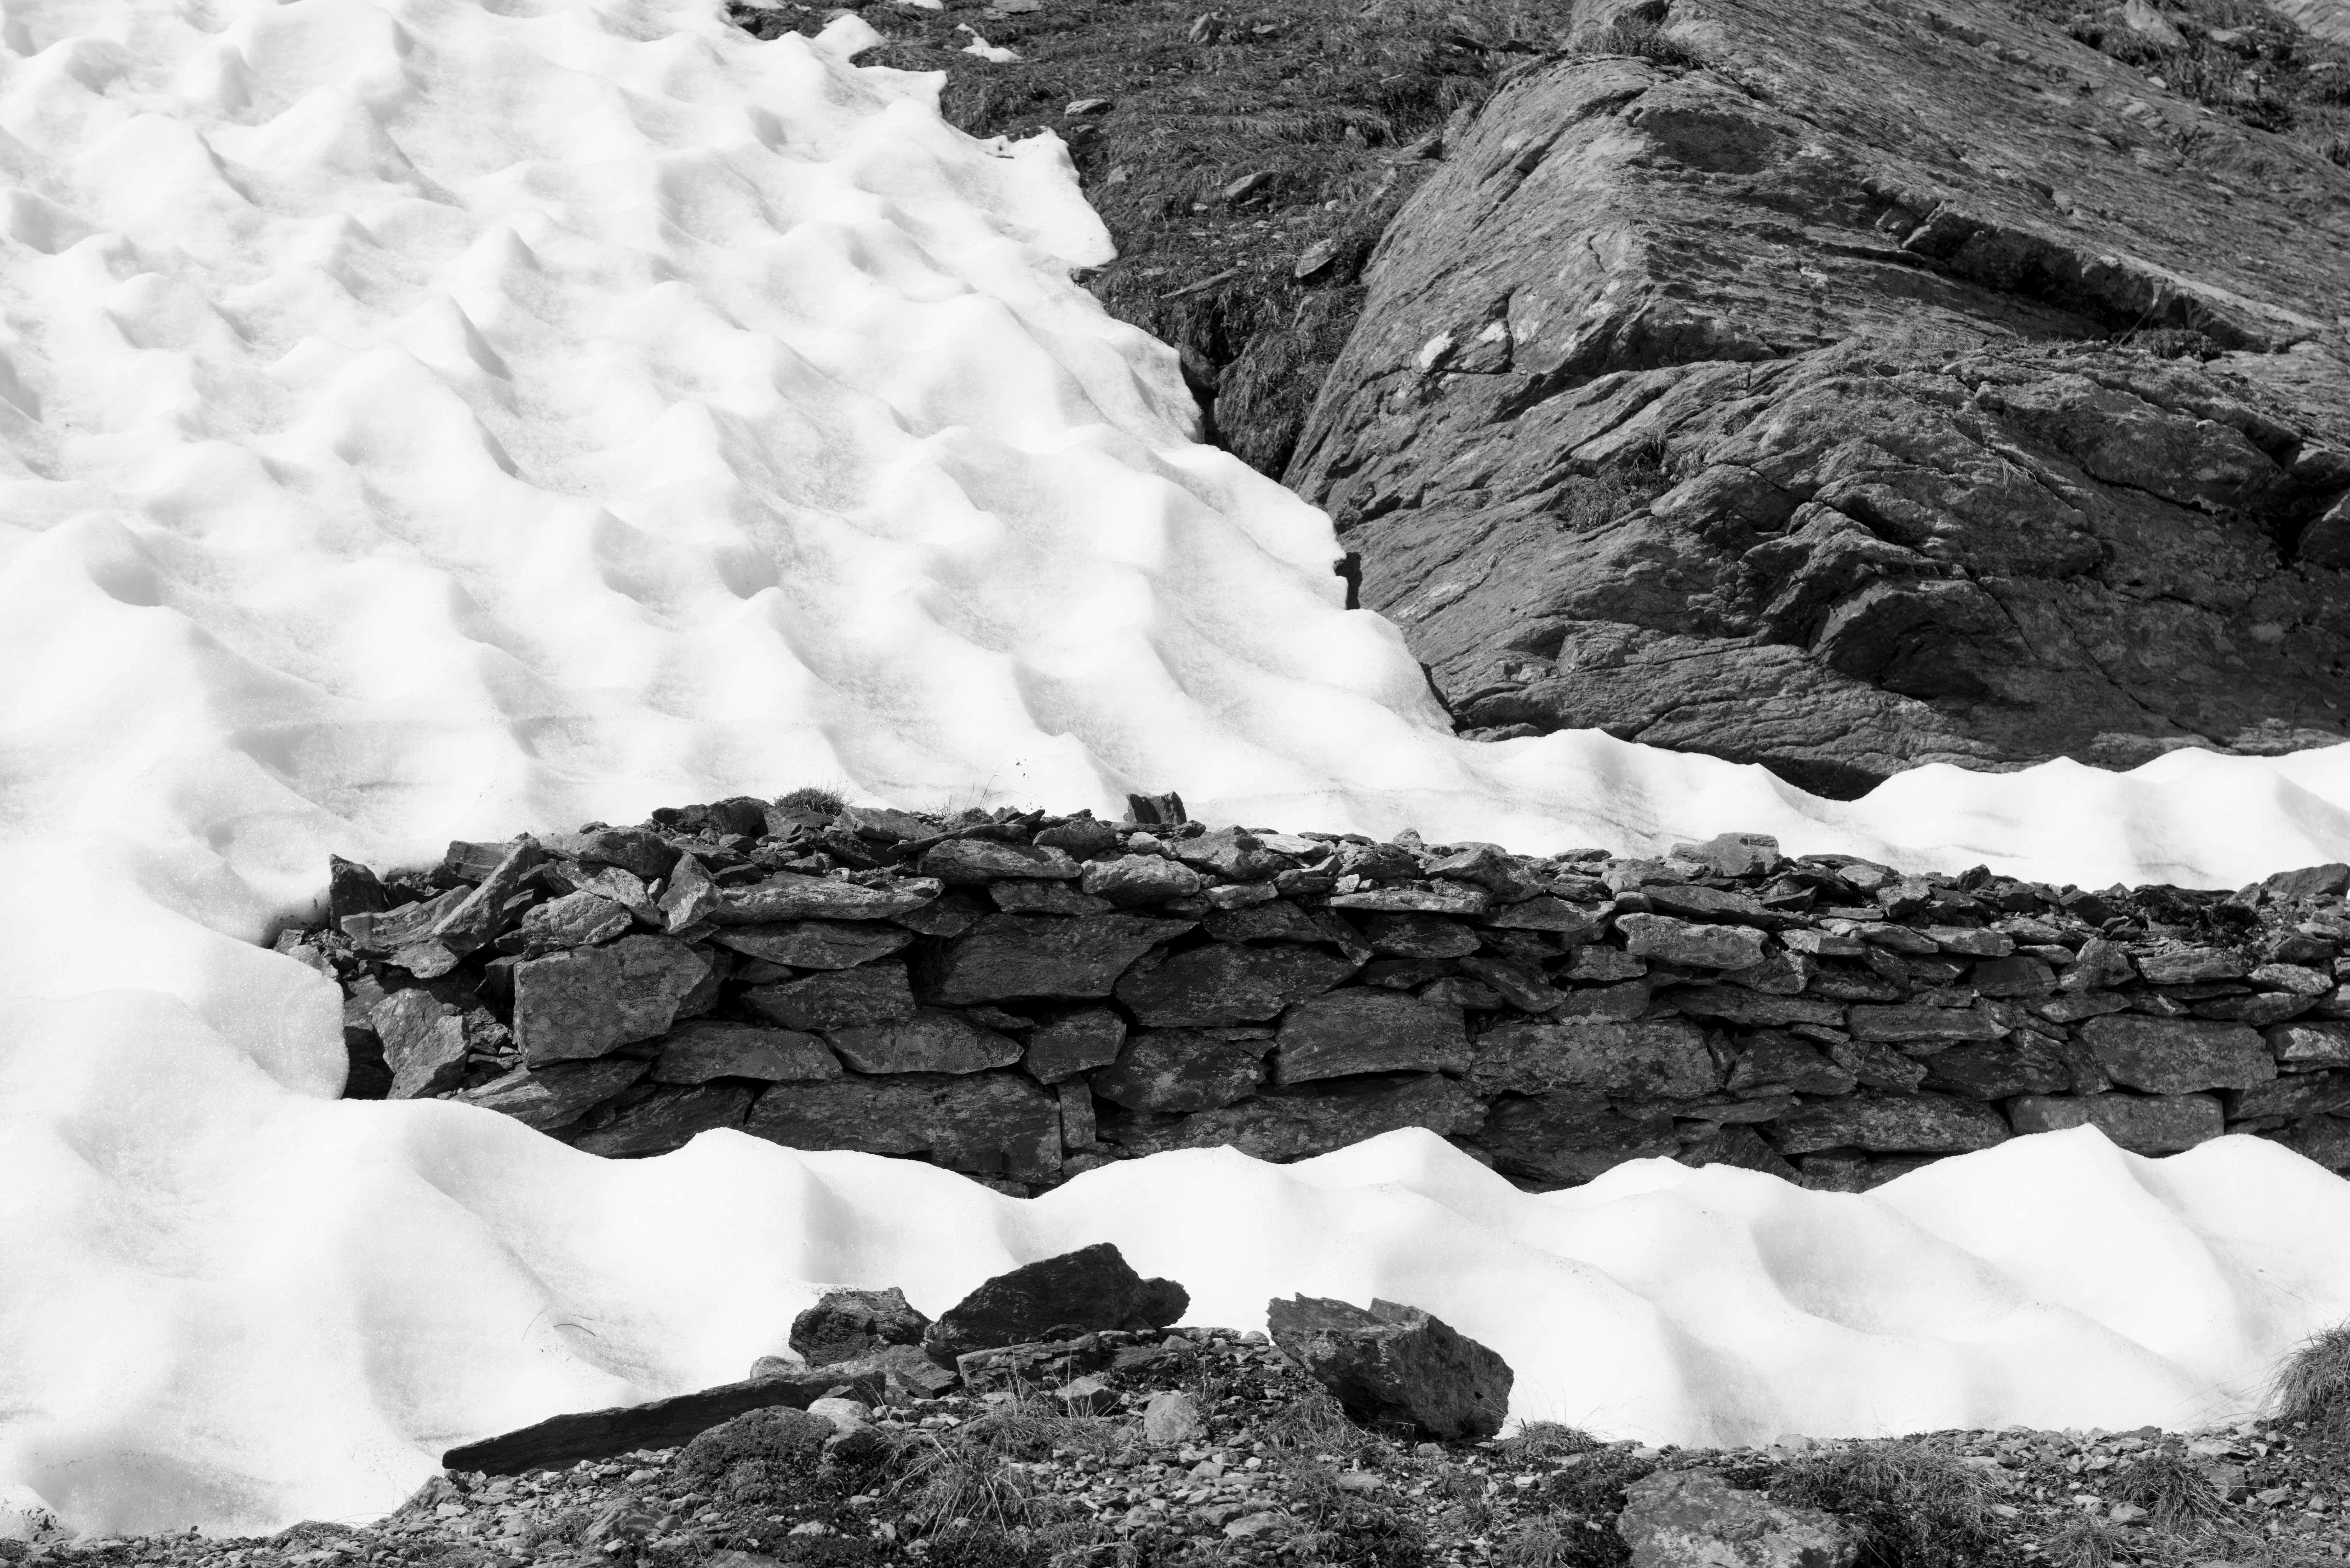 A Fatal Pass, War remains emerging from the snow. Black and White landscape - Photograph by Luca Artioli